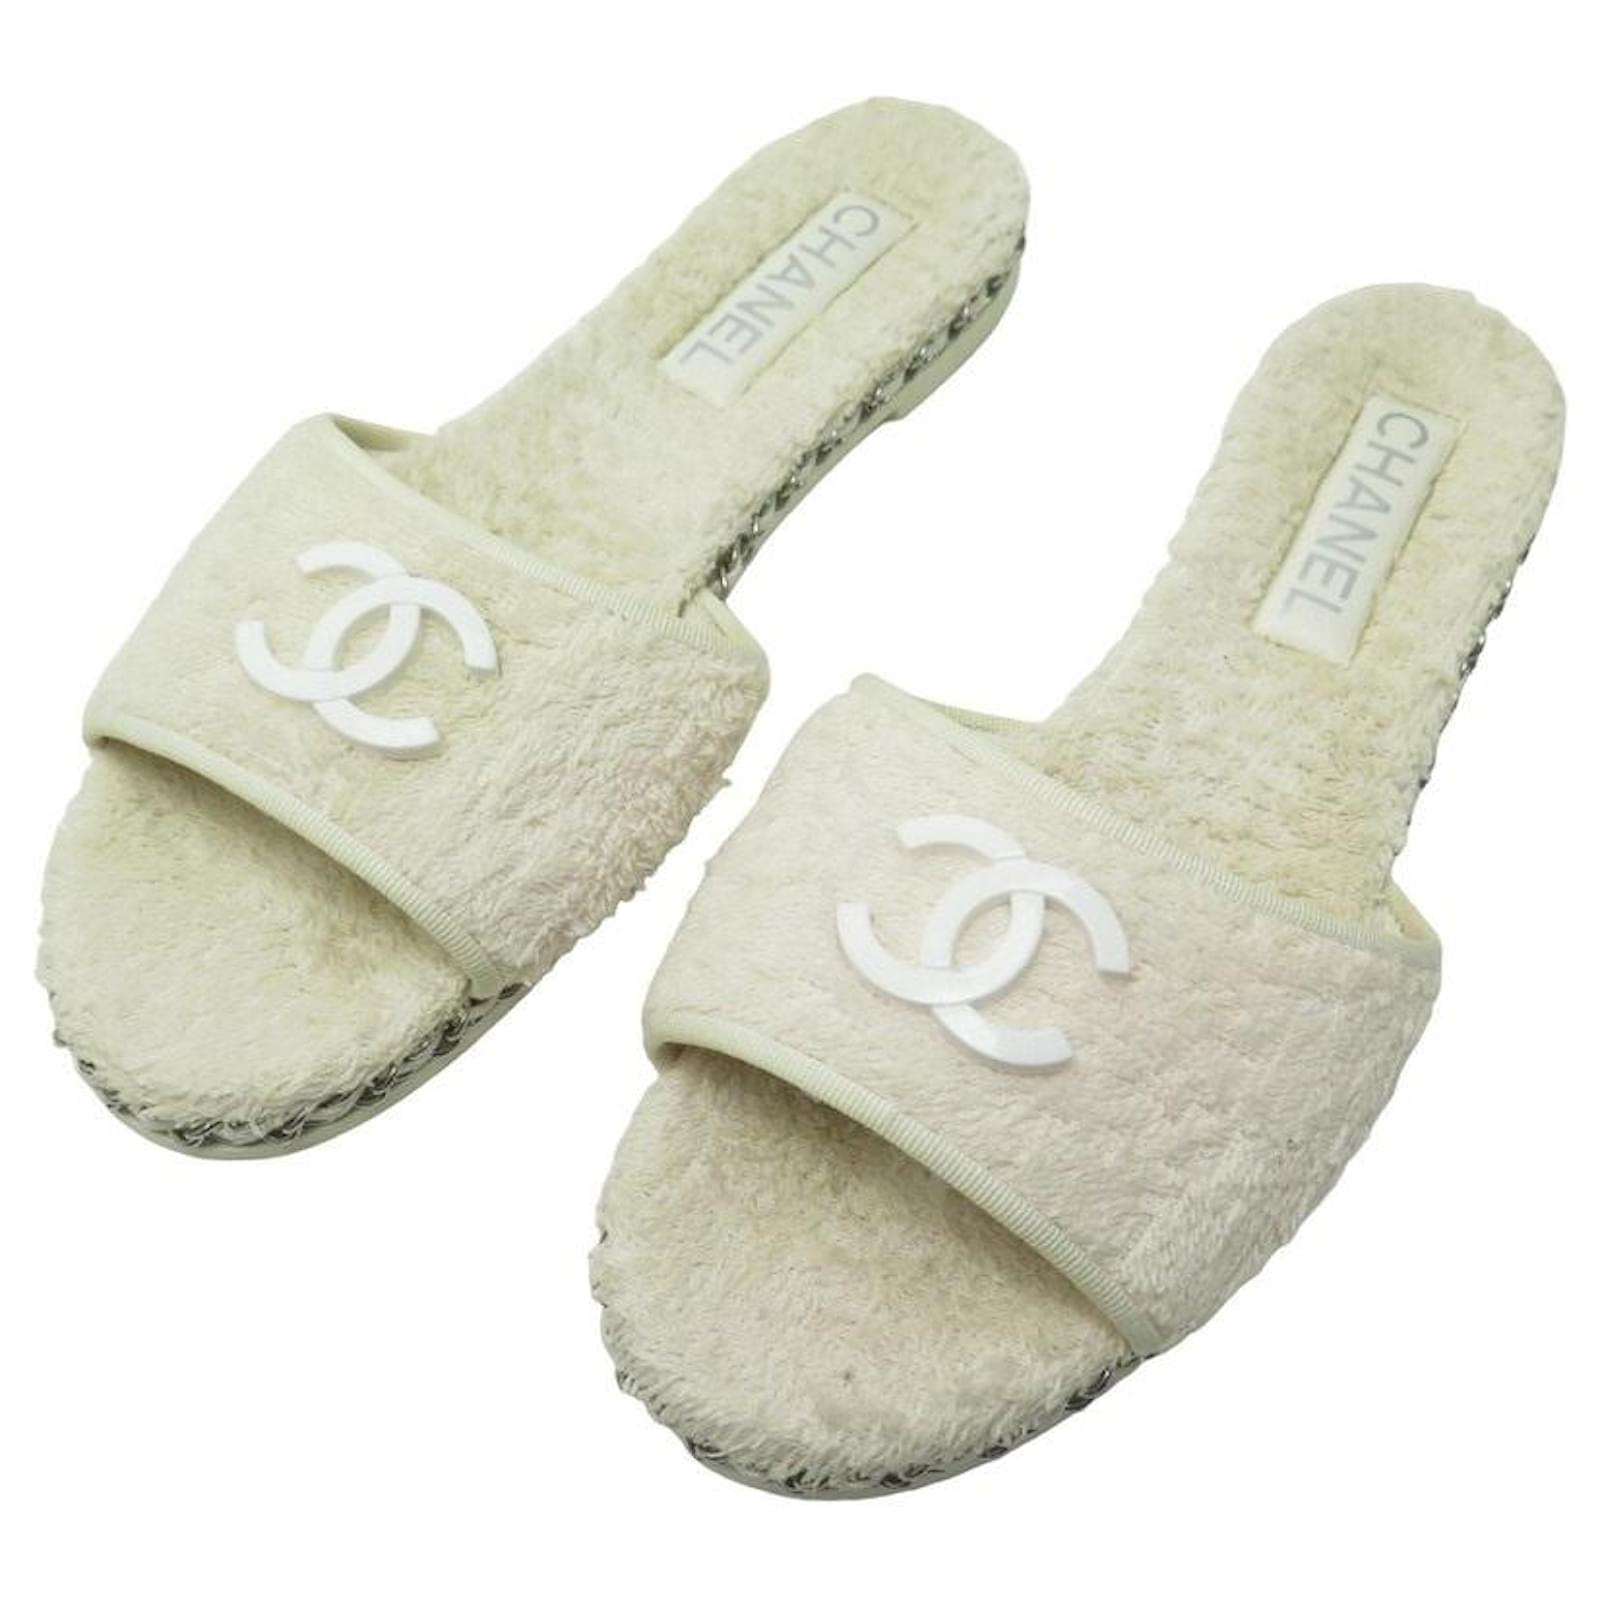 CHANEL SHOES MULES SANDALS IN TERRY CLOTH 40 BLANC WHITE SANDALS   - Joli Closet